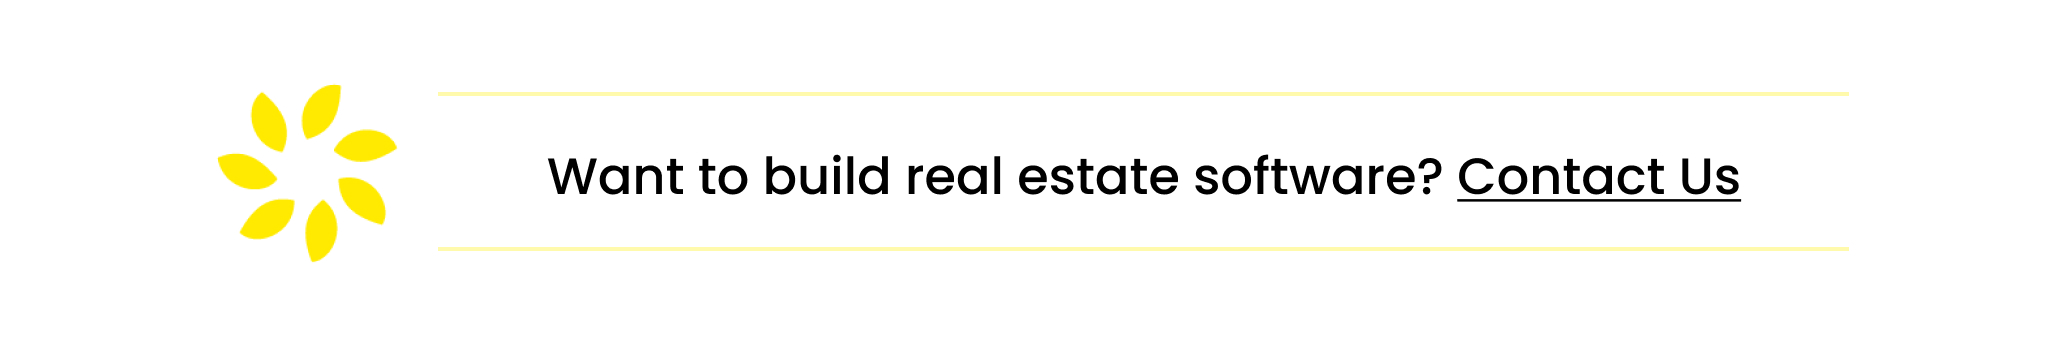 How to build real estate software